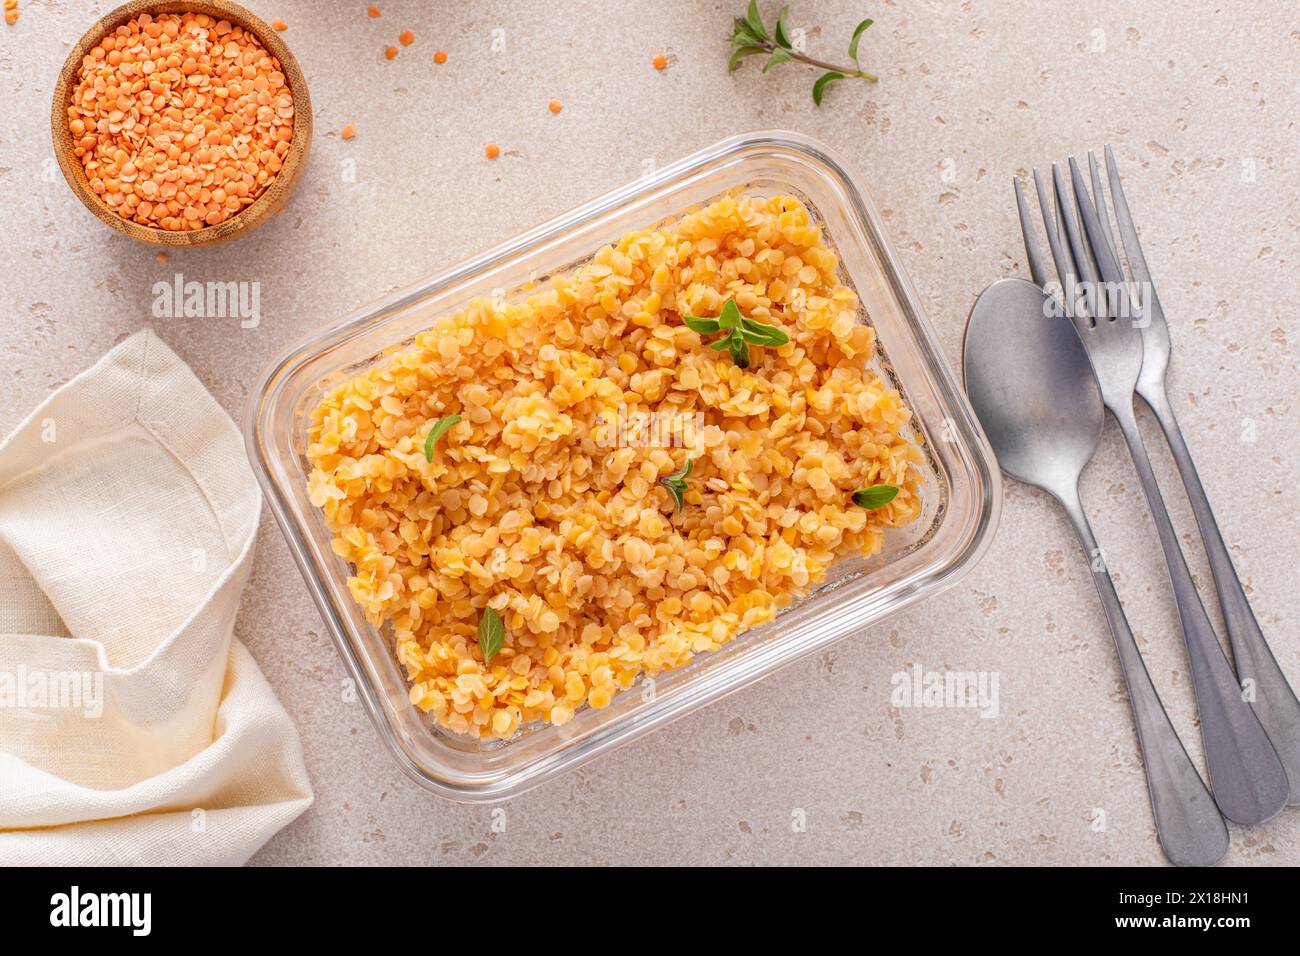 Cooked red lentils in a meal prep container, healthy vegan protein source, meat alternative Stock Photo